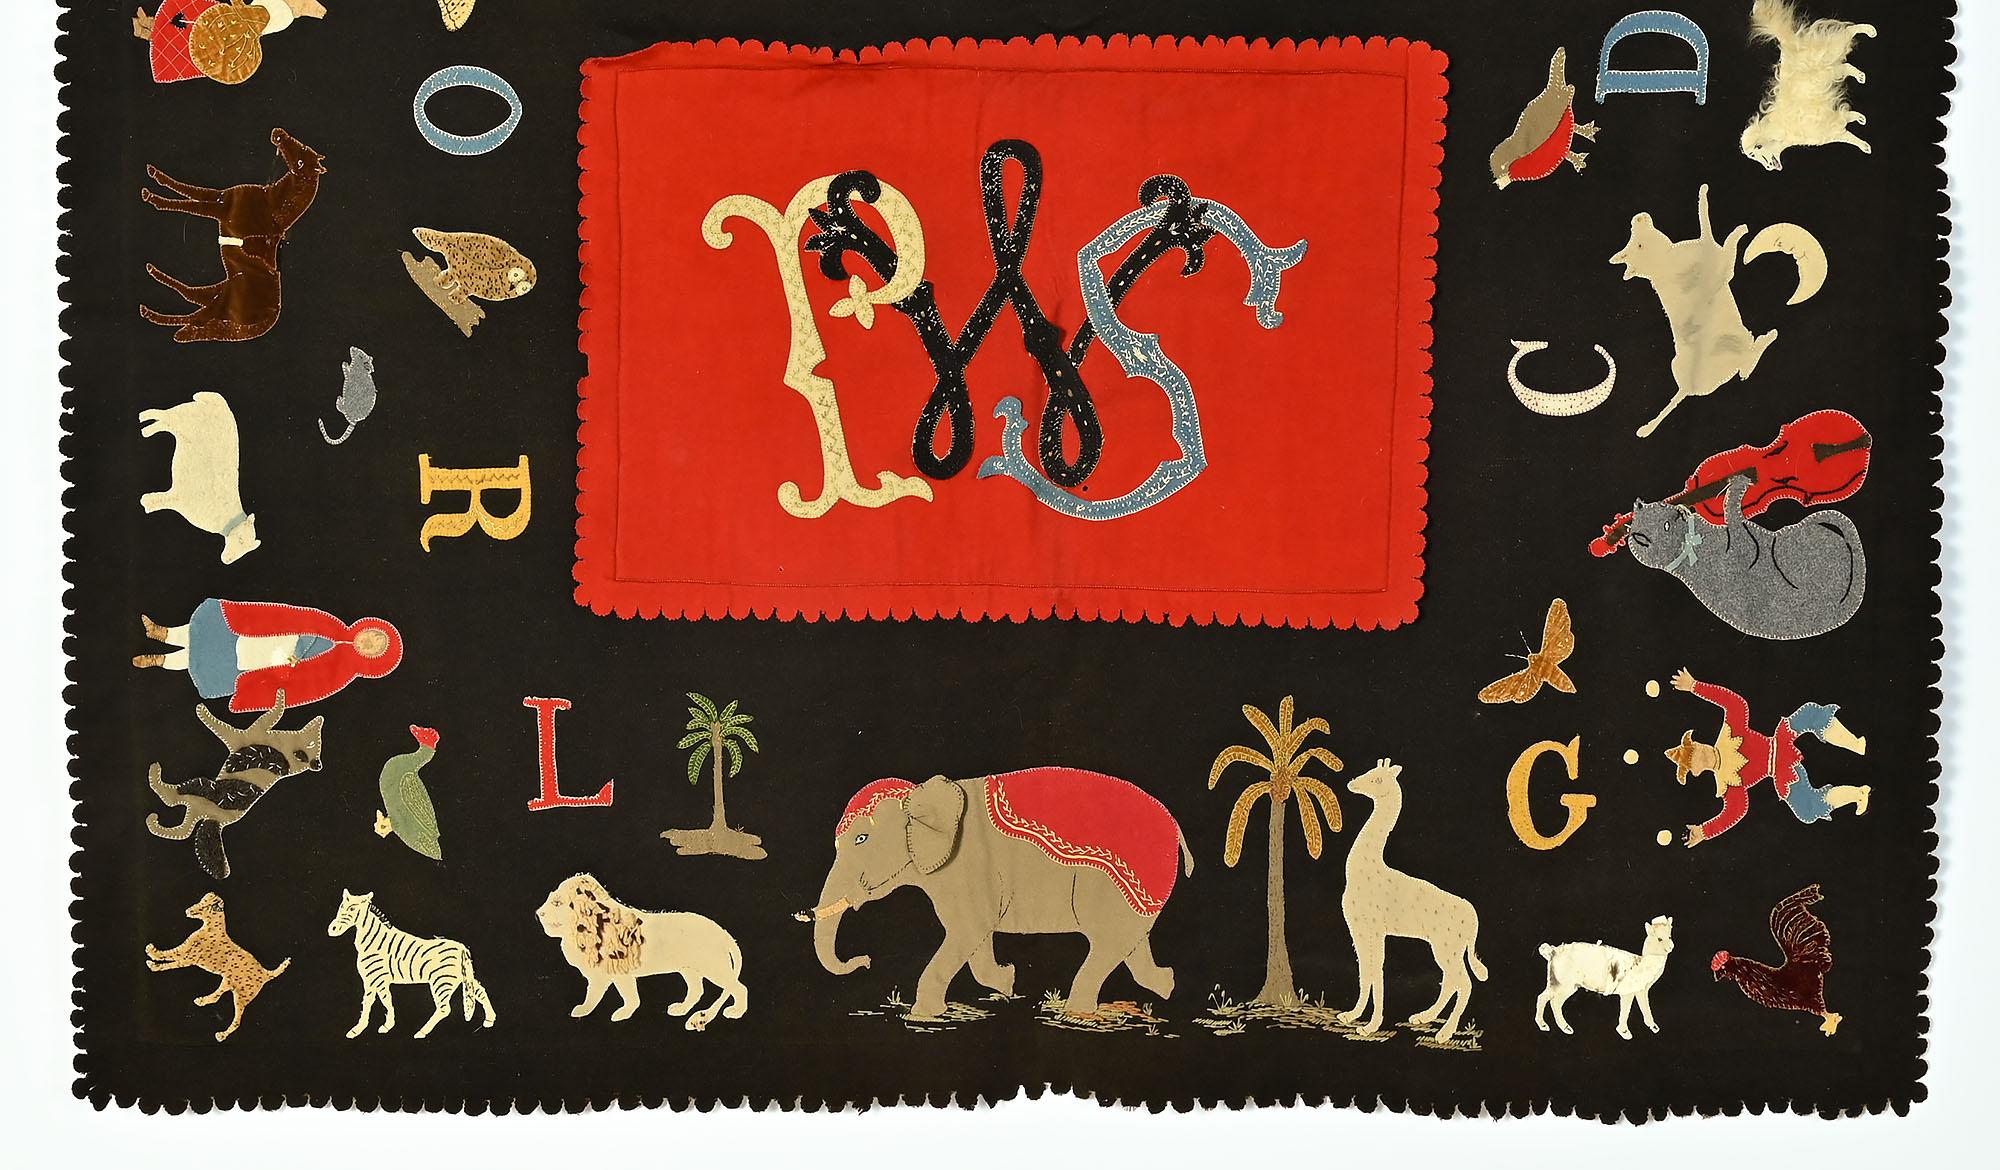 This appliqued table mat may have been made for a child but it can certainly please any adult. Next to each letter is an animal or vignette whose first letter is shown next to it. For instance, next to the letter C is the cow jumping over the moon.